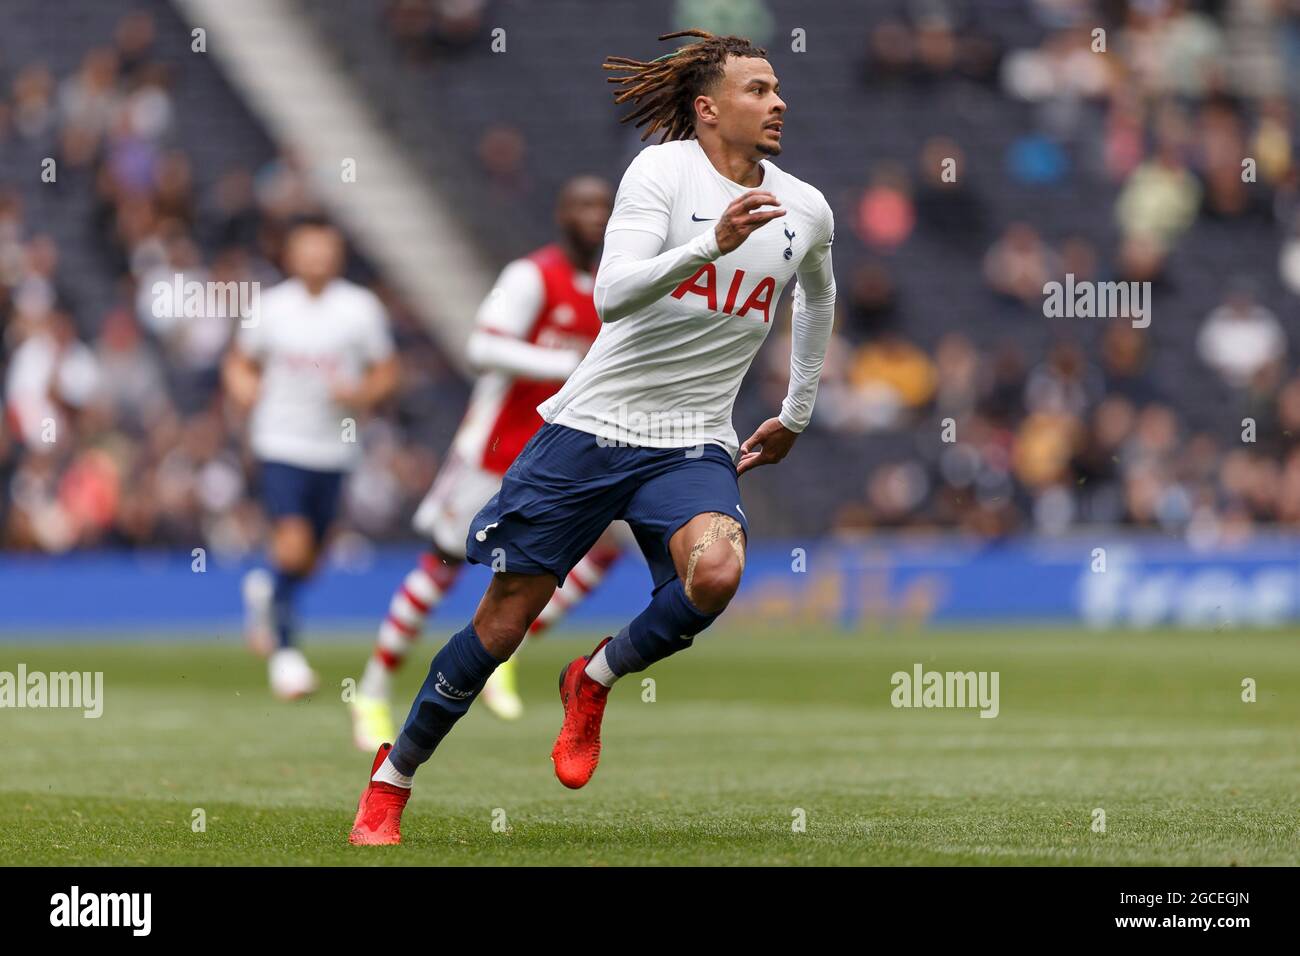 London, UK. 08th Aug, 2021. Dele Alli of Tottenham Hotspur during the Pre-Season Friendly match between Tottenham Hotspur and Arsenal at Tottenham Hotspur Stadium on August 8th 2021 in London, England. (Photo by Daniel Chesterton/phcimages.com) Credit: PHC Images/Alamy Live News Stock Photo